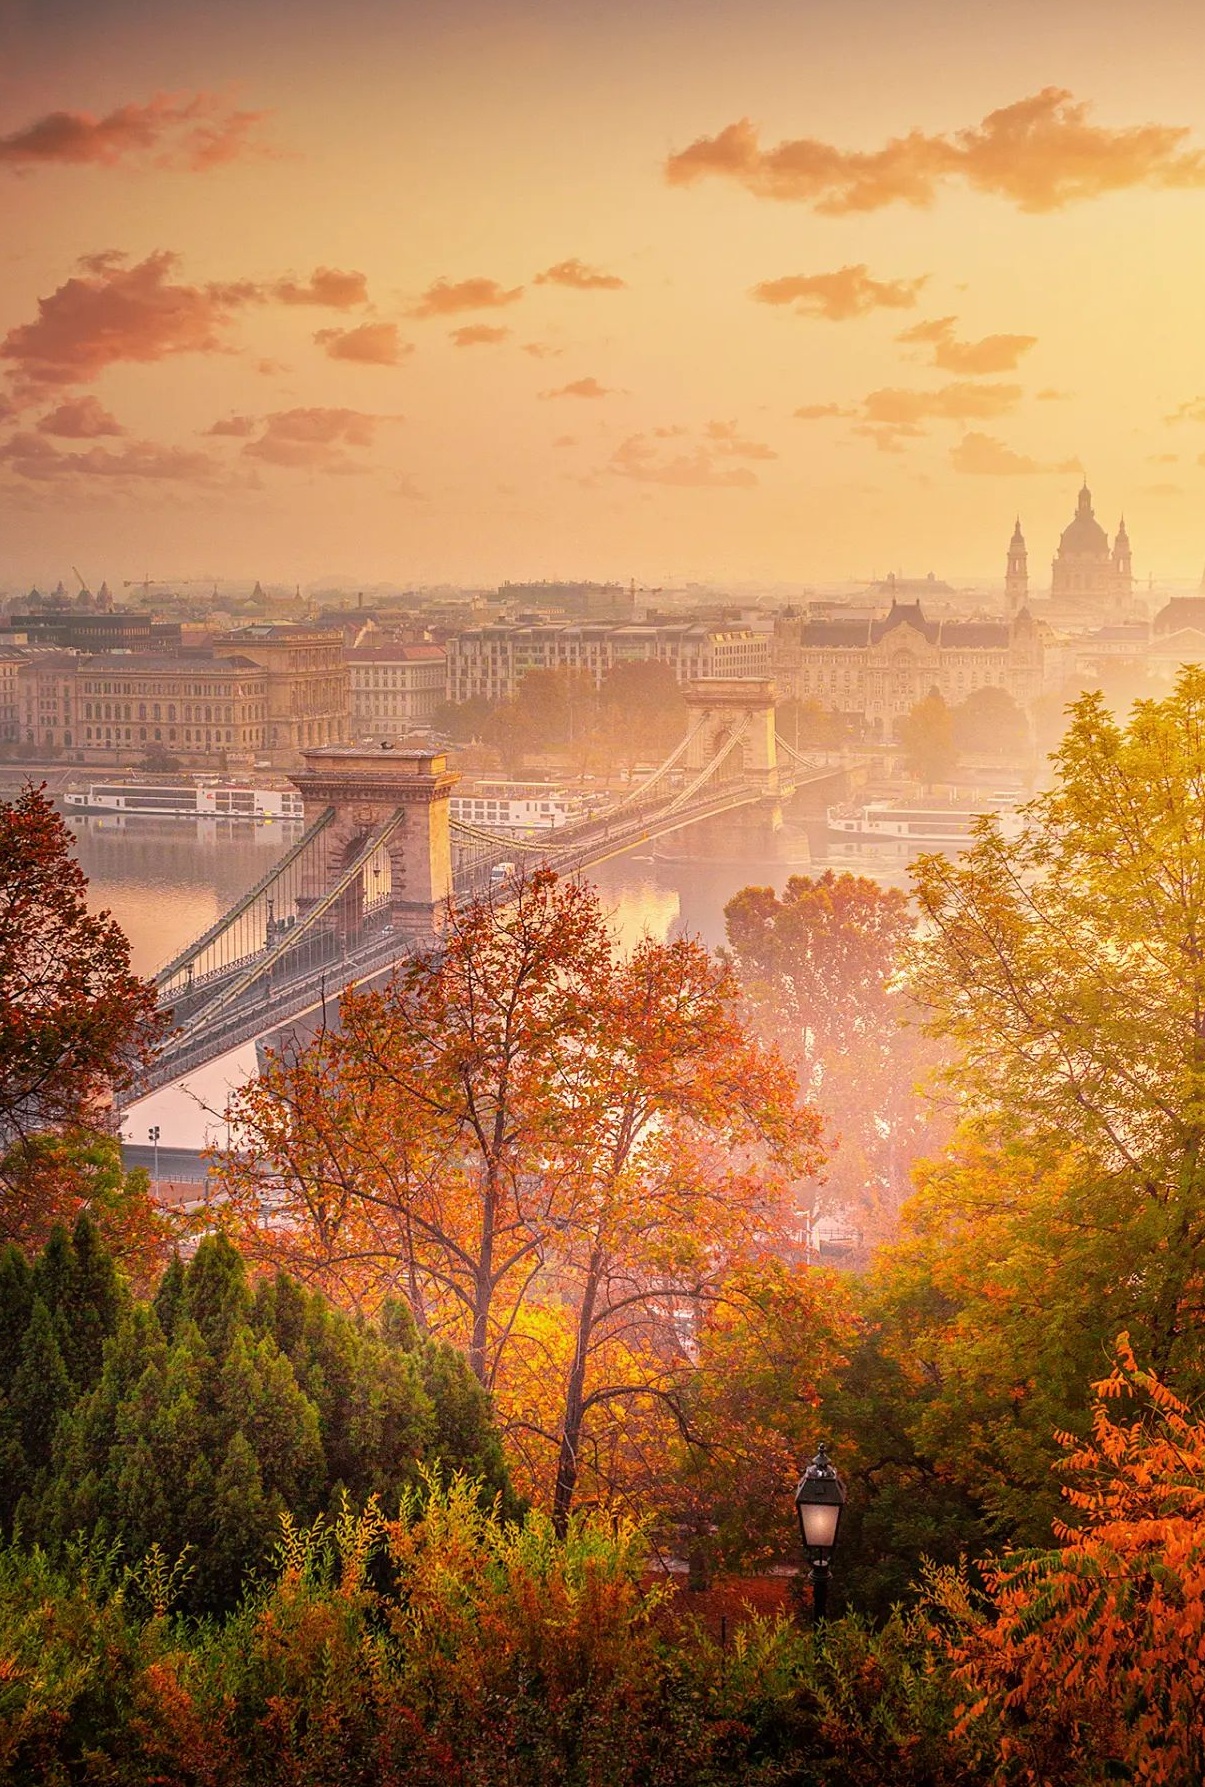 Budapest, Hungary instagrammable couple destination'